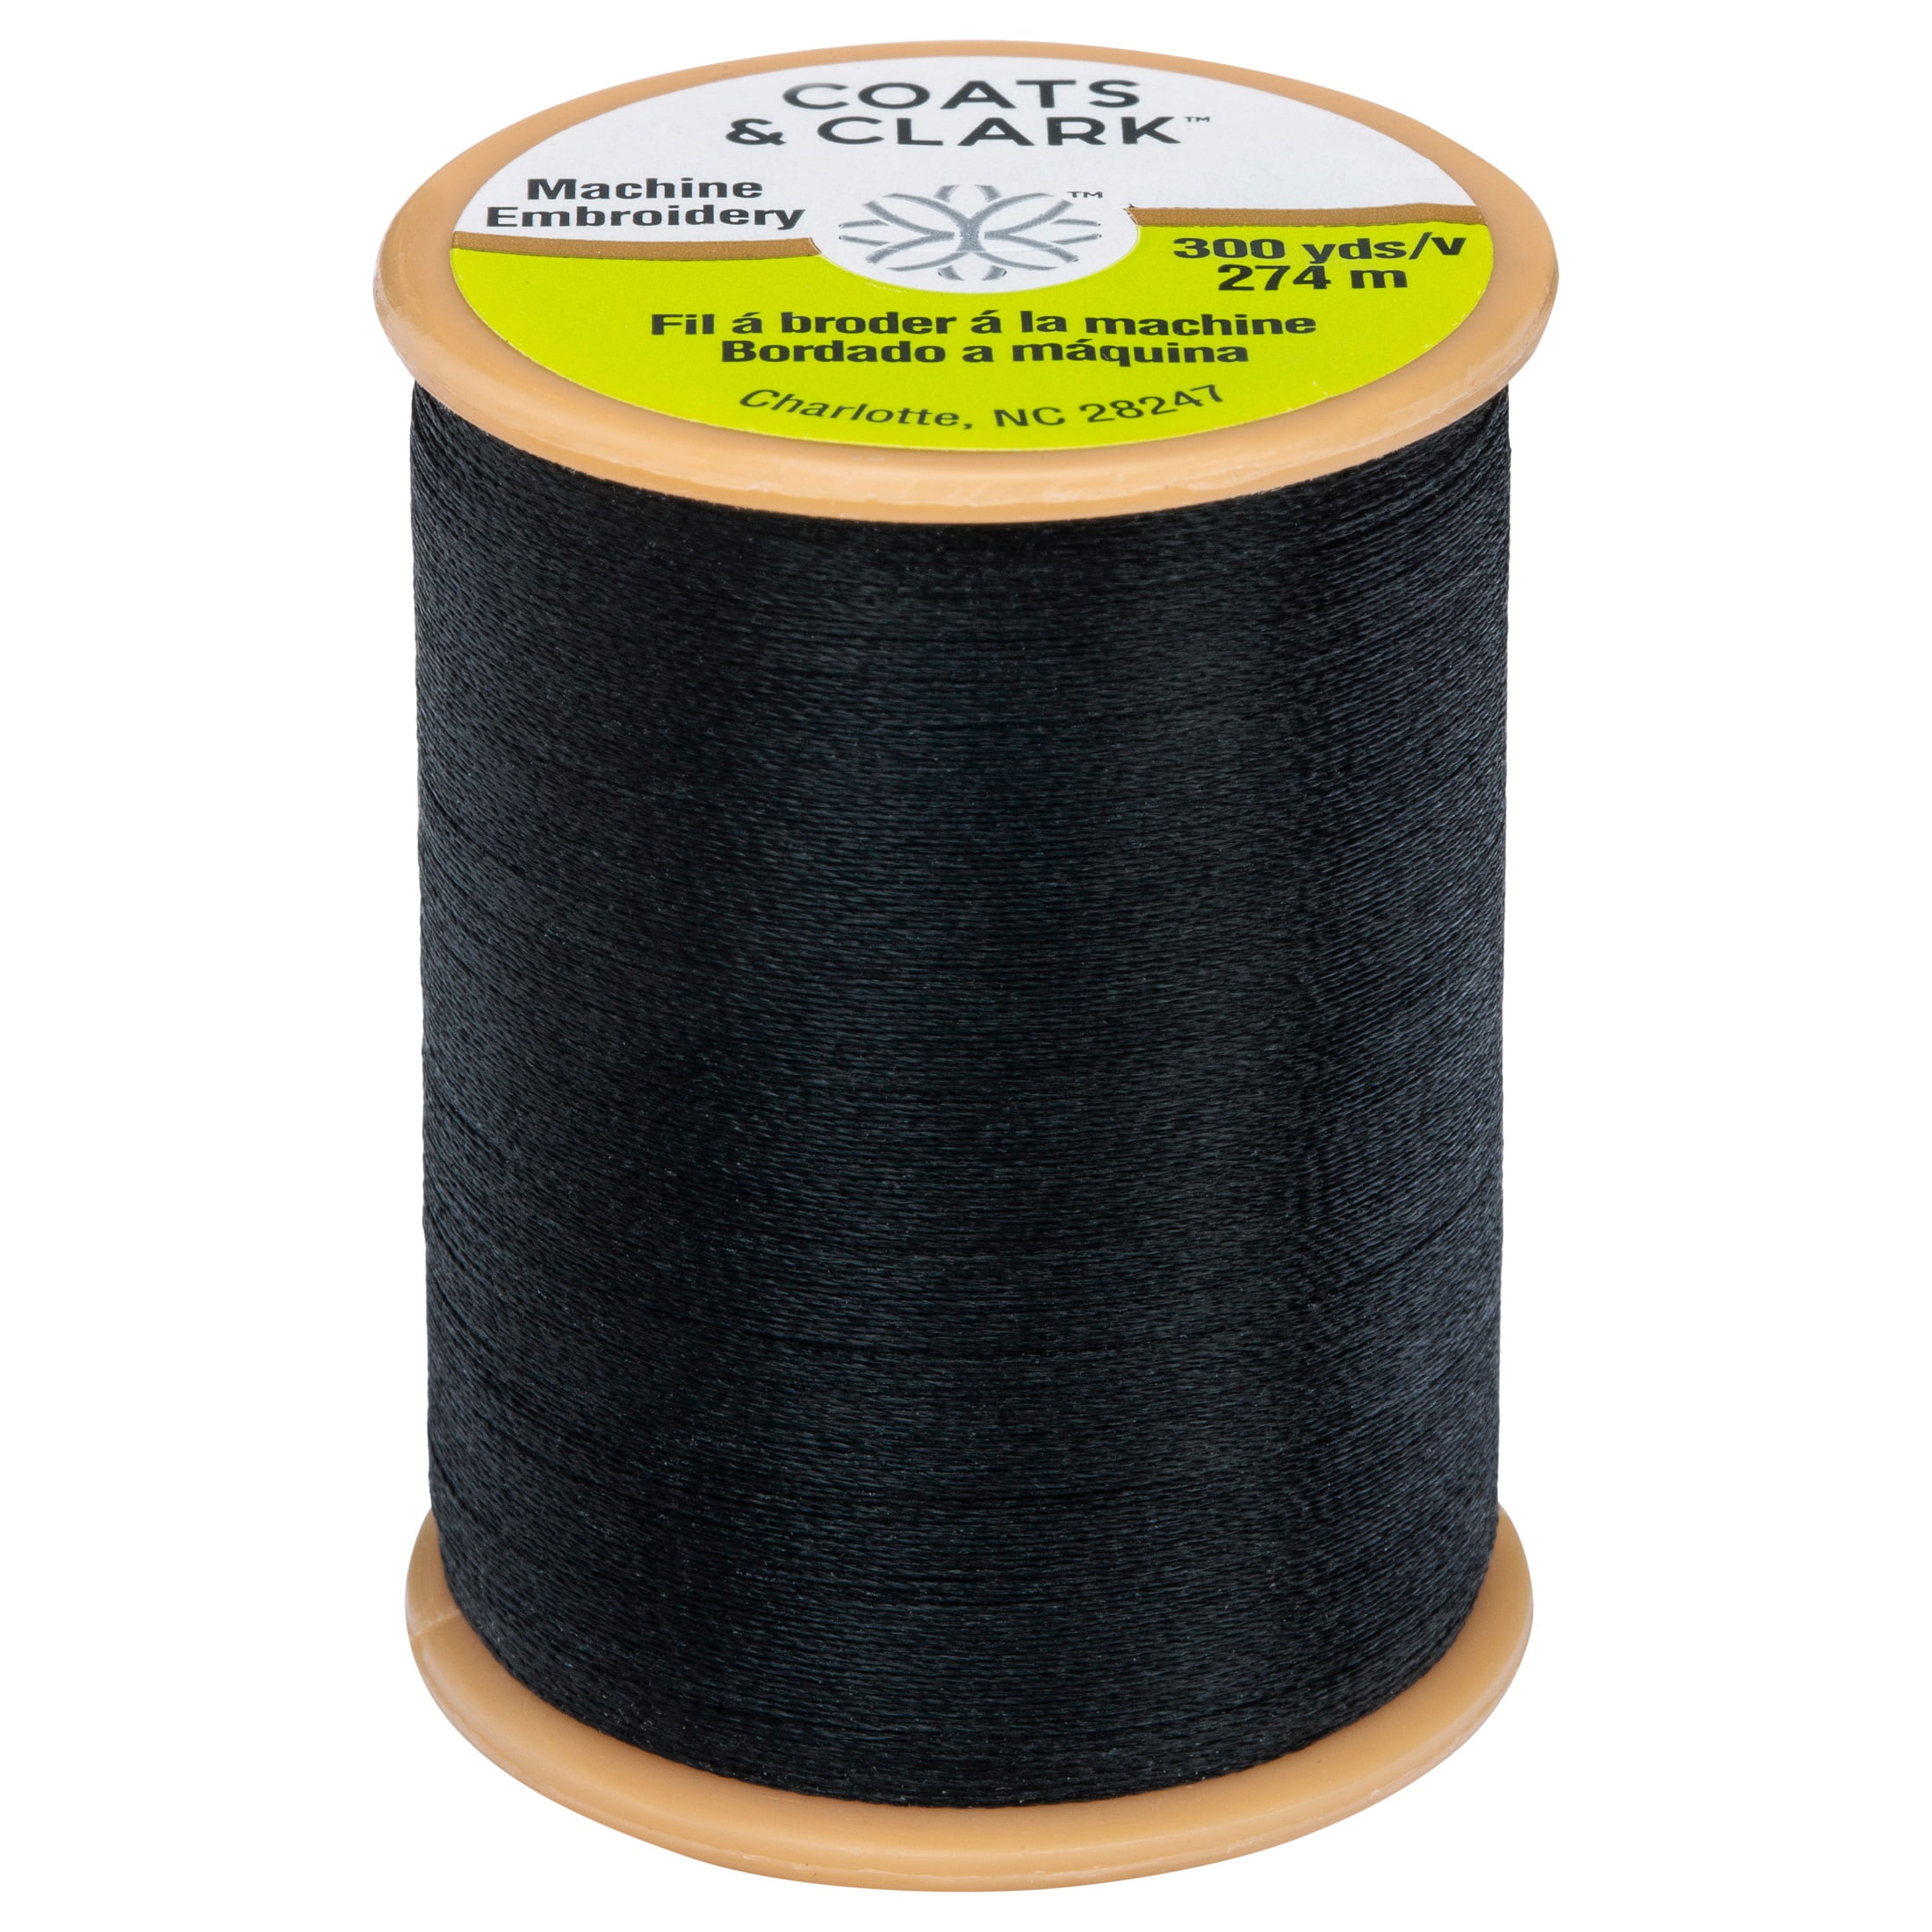  C&C Trilobal Poly Machine Embroidery Thread 3 - Pack of Black  Thread : Arts, Crafts & Sewing